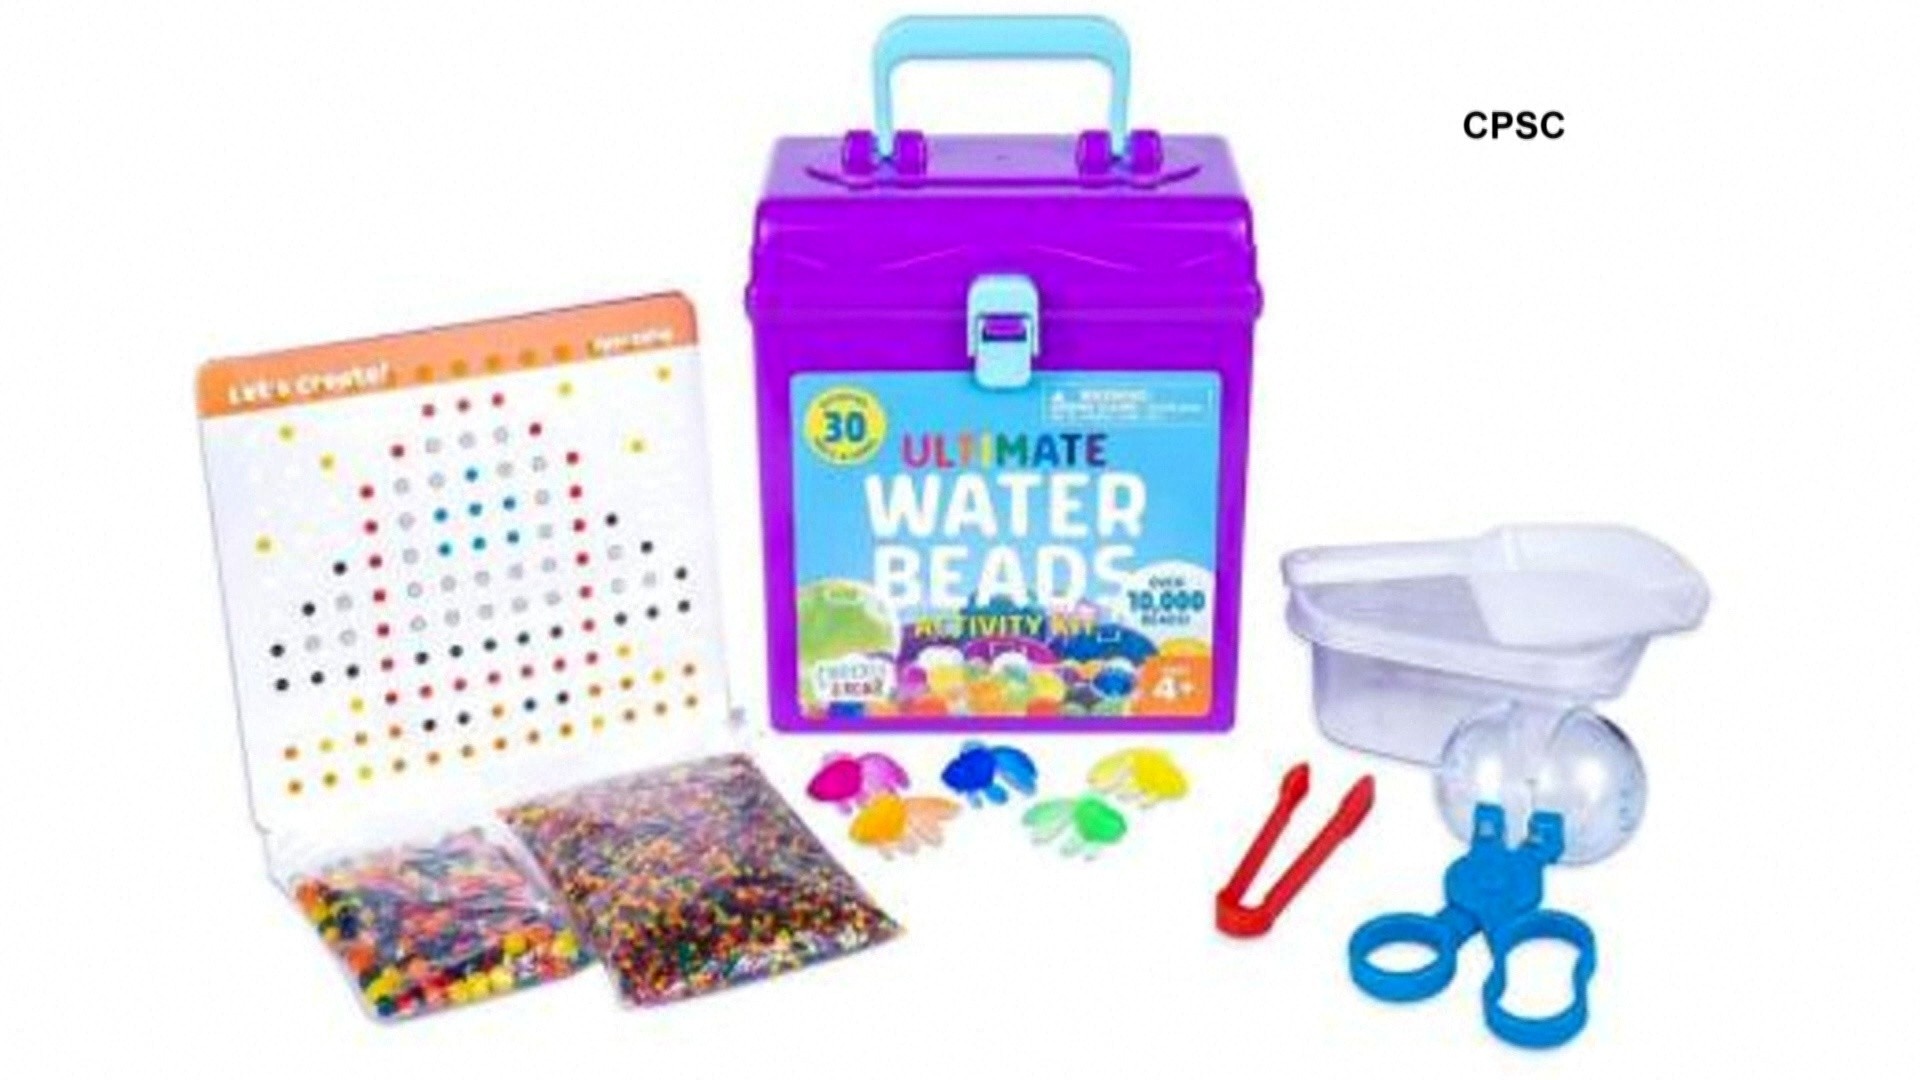 Water beads could pose life-threatening risk to children: Health